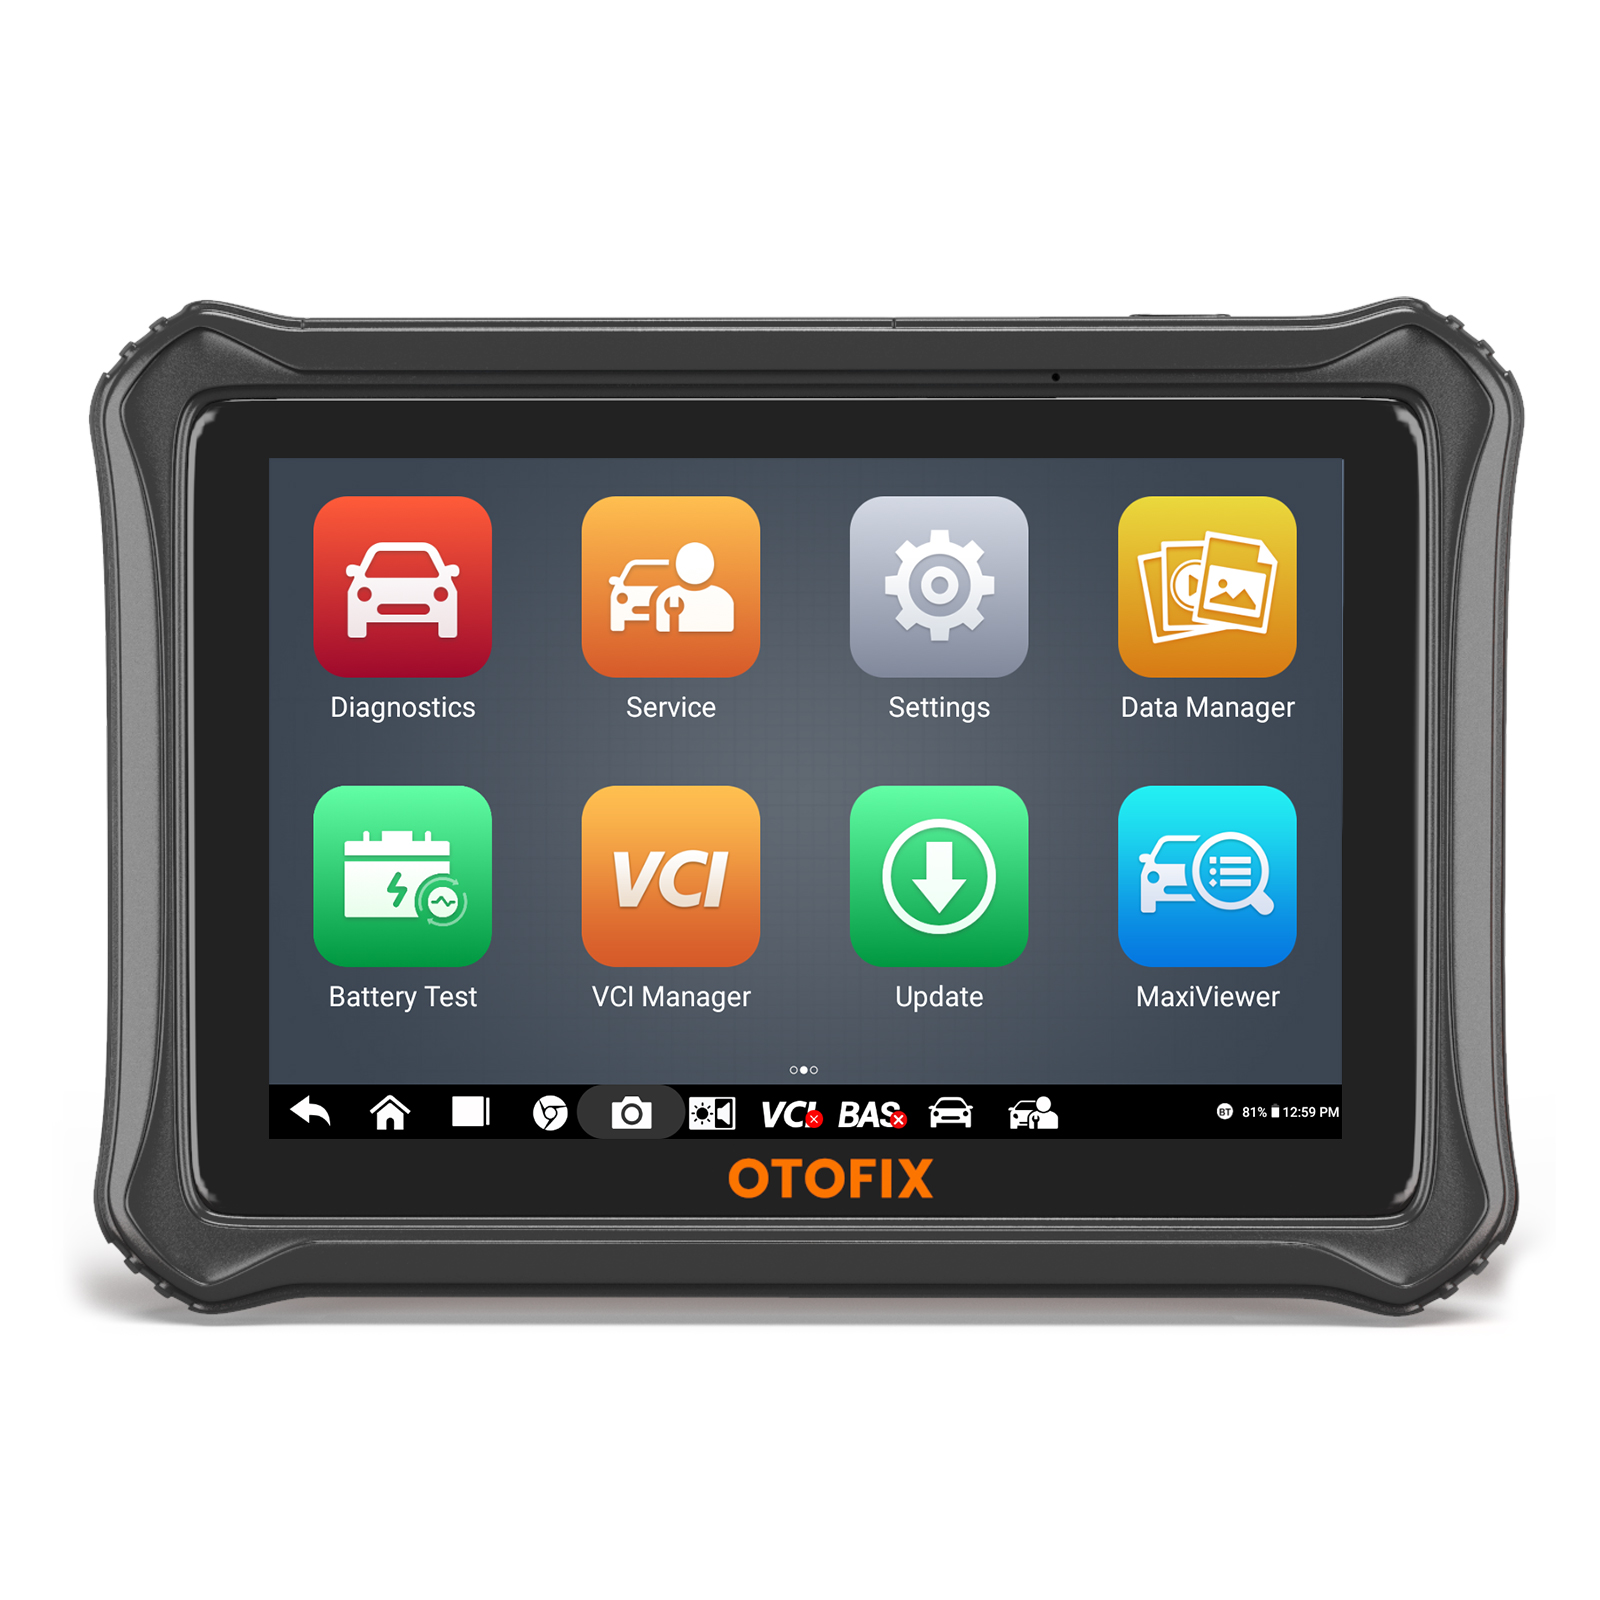 2024 Autel MaxiCOM MK808Z-BT Full System Diagnostic Tool Newly Adds Active  Test and Battery Testing Functions